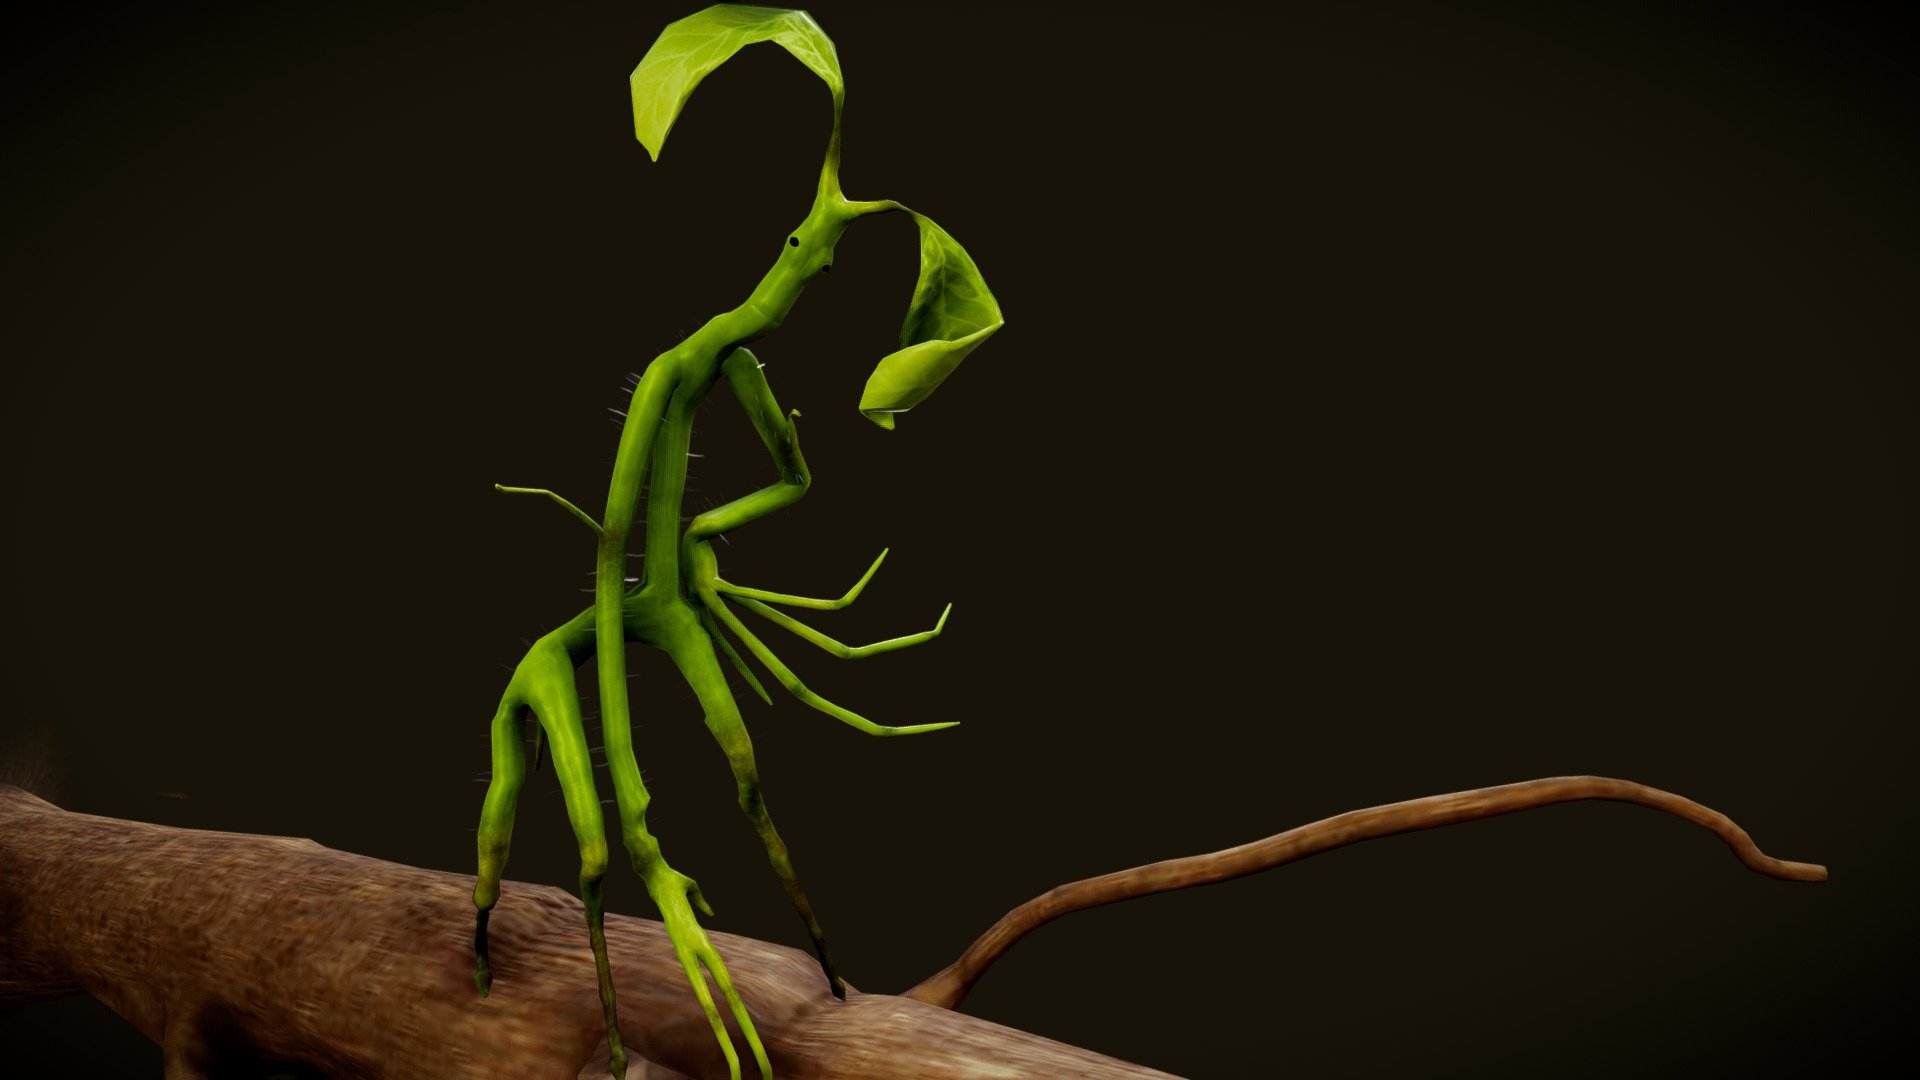 Model for a client's magic VR show.

I modeled Pickett in Blender, then I rigged and added shapekeys for the facial animation. I textured the model in Substance Painter. For the texturing process I used leaf pictures I took myself as well as tree grain alphas 3d model